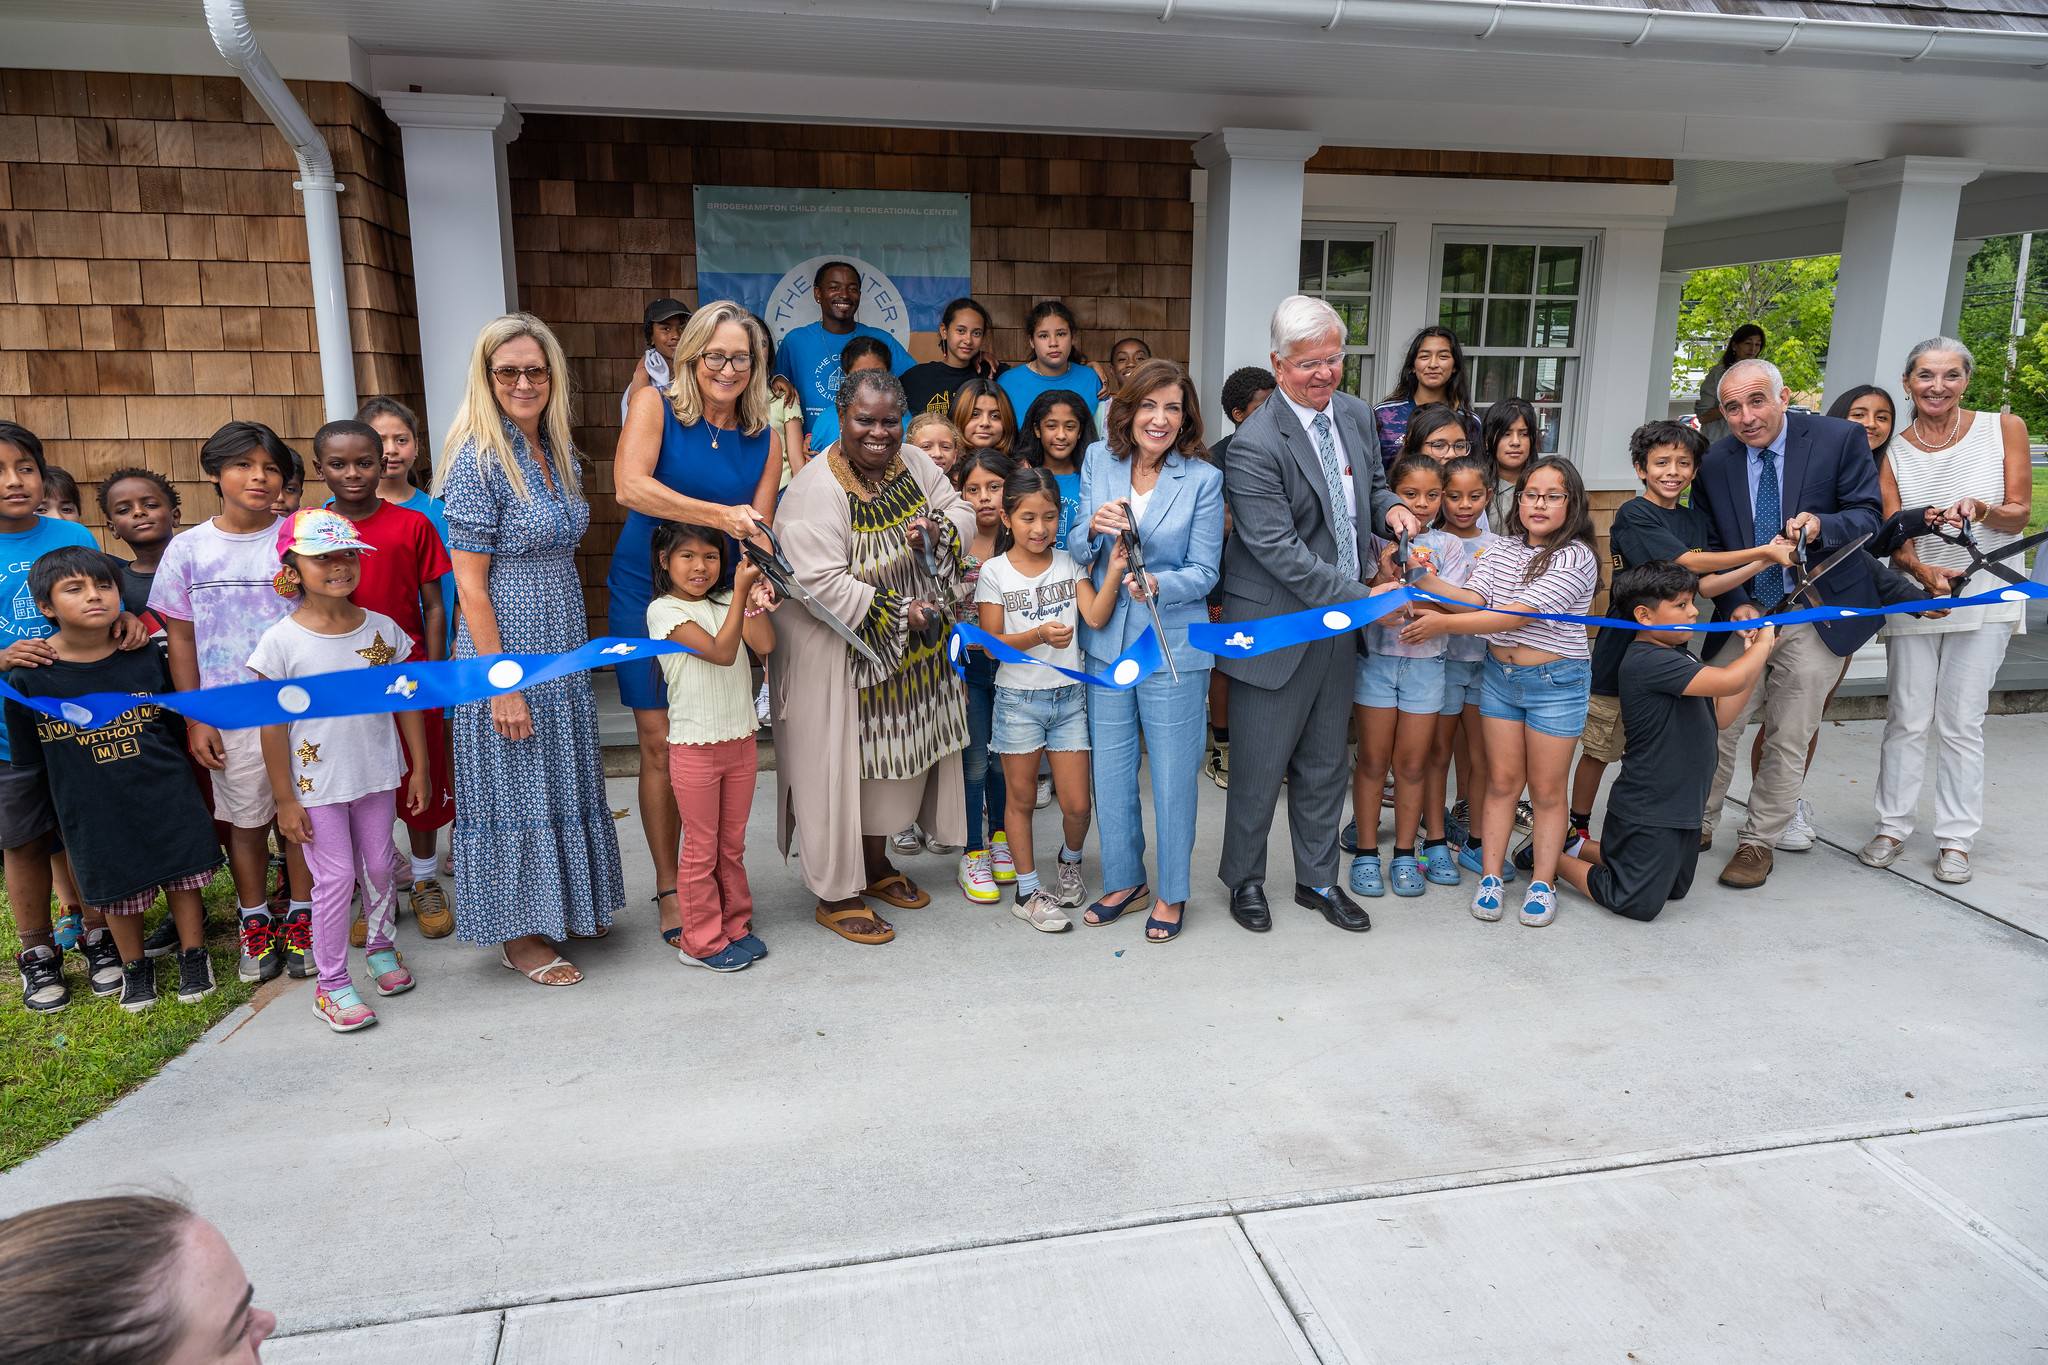 Officials celebrated the long-awaited debut of the Bridgehampton Child Care & Recreational Center’s new $3.3 million facility